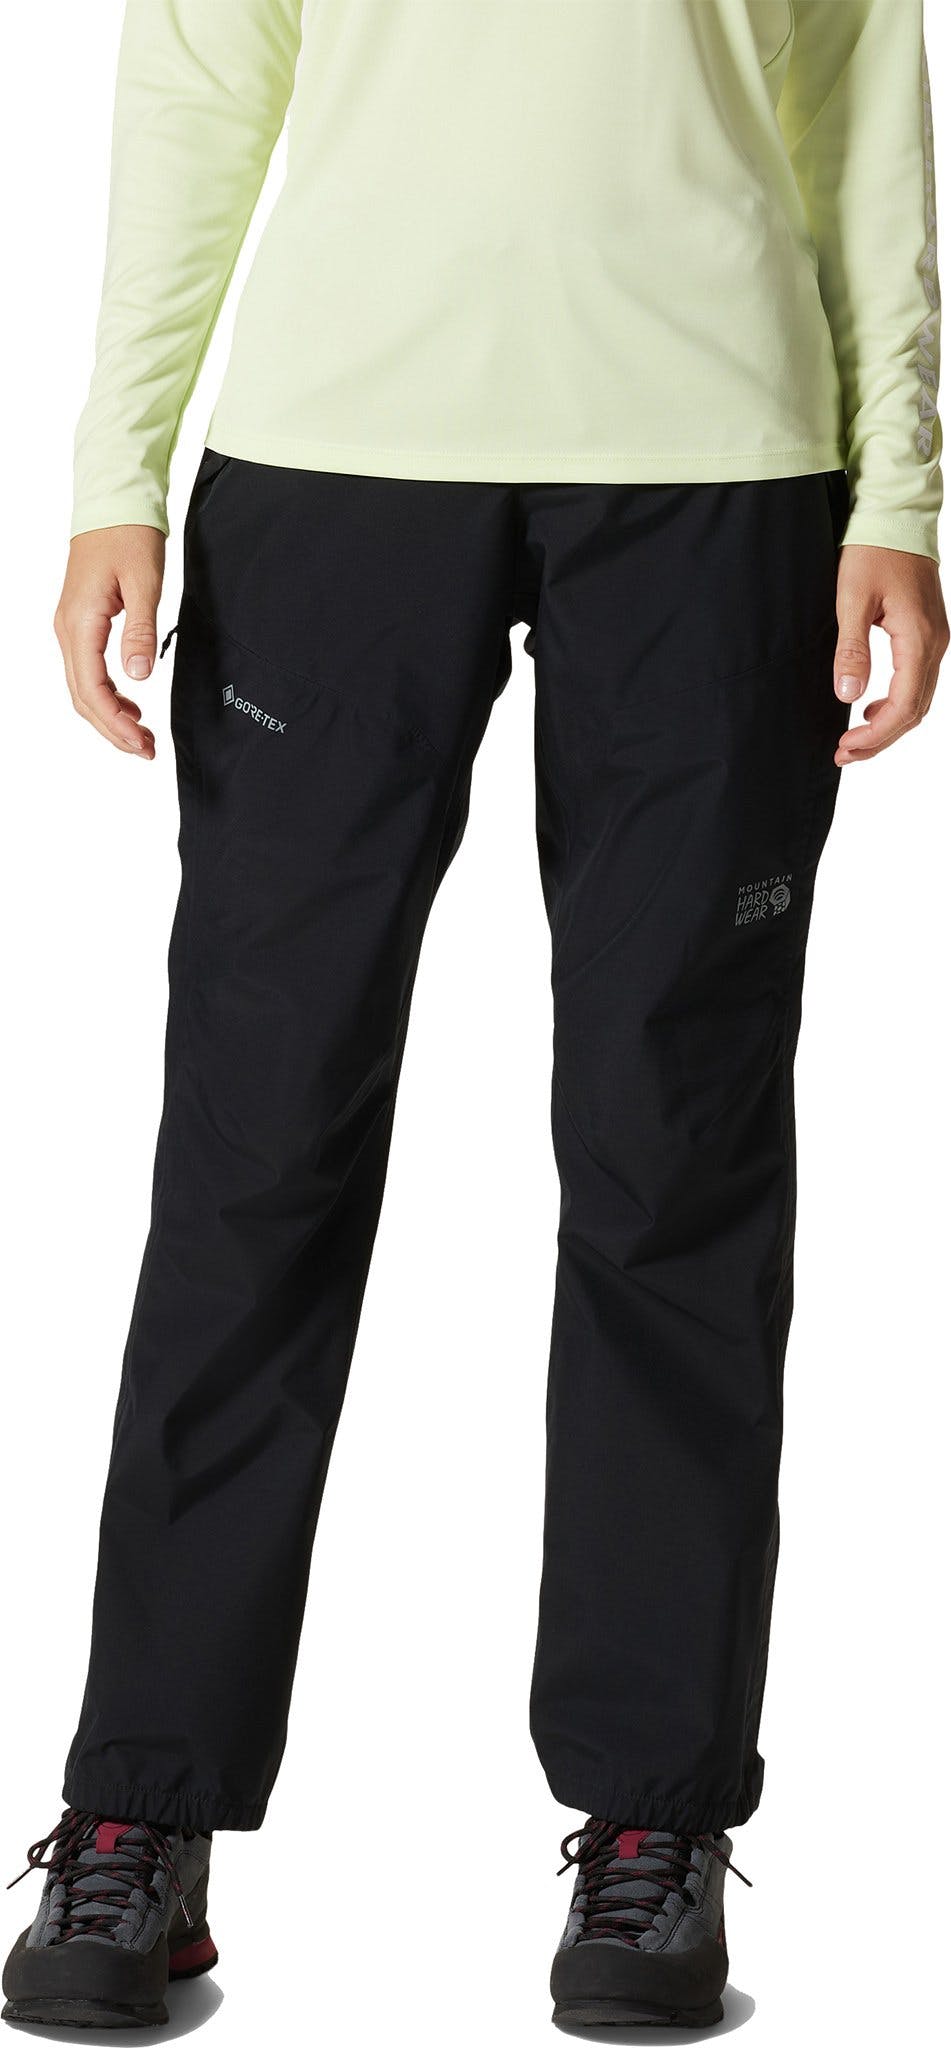 Product image for Exposure/2 Paclite Pant - Women's